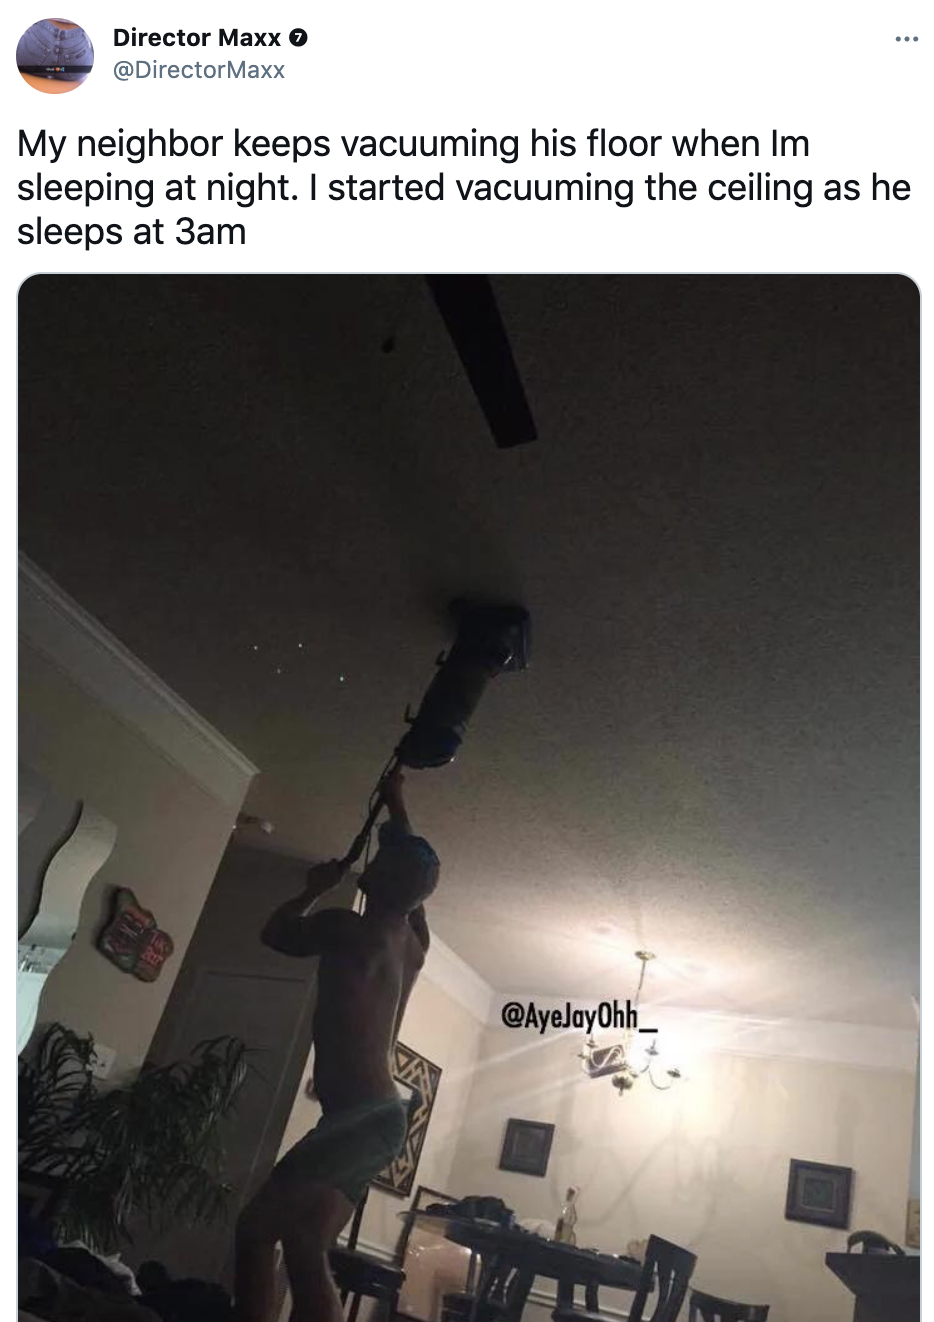 tweet about a person vacuuming the ceiling to bother their neighbor